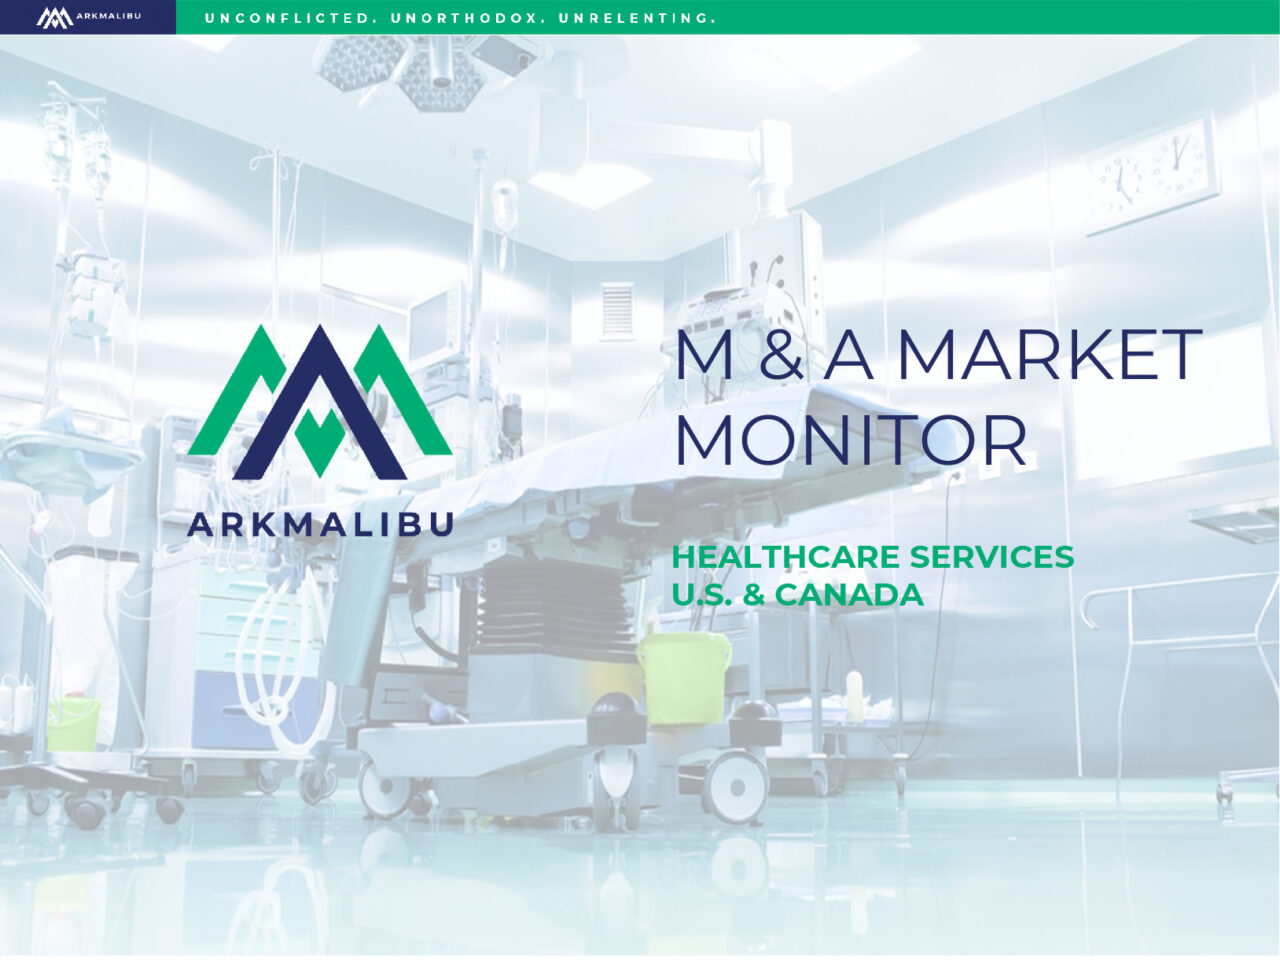 Market Monitor Cover for Healthcare. Faded Image of an operating room in the background